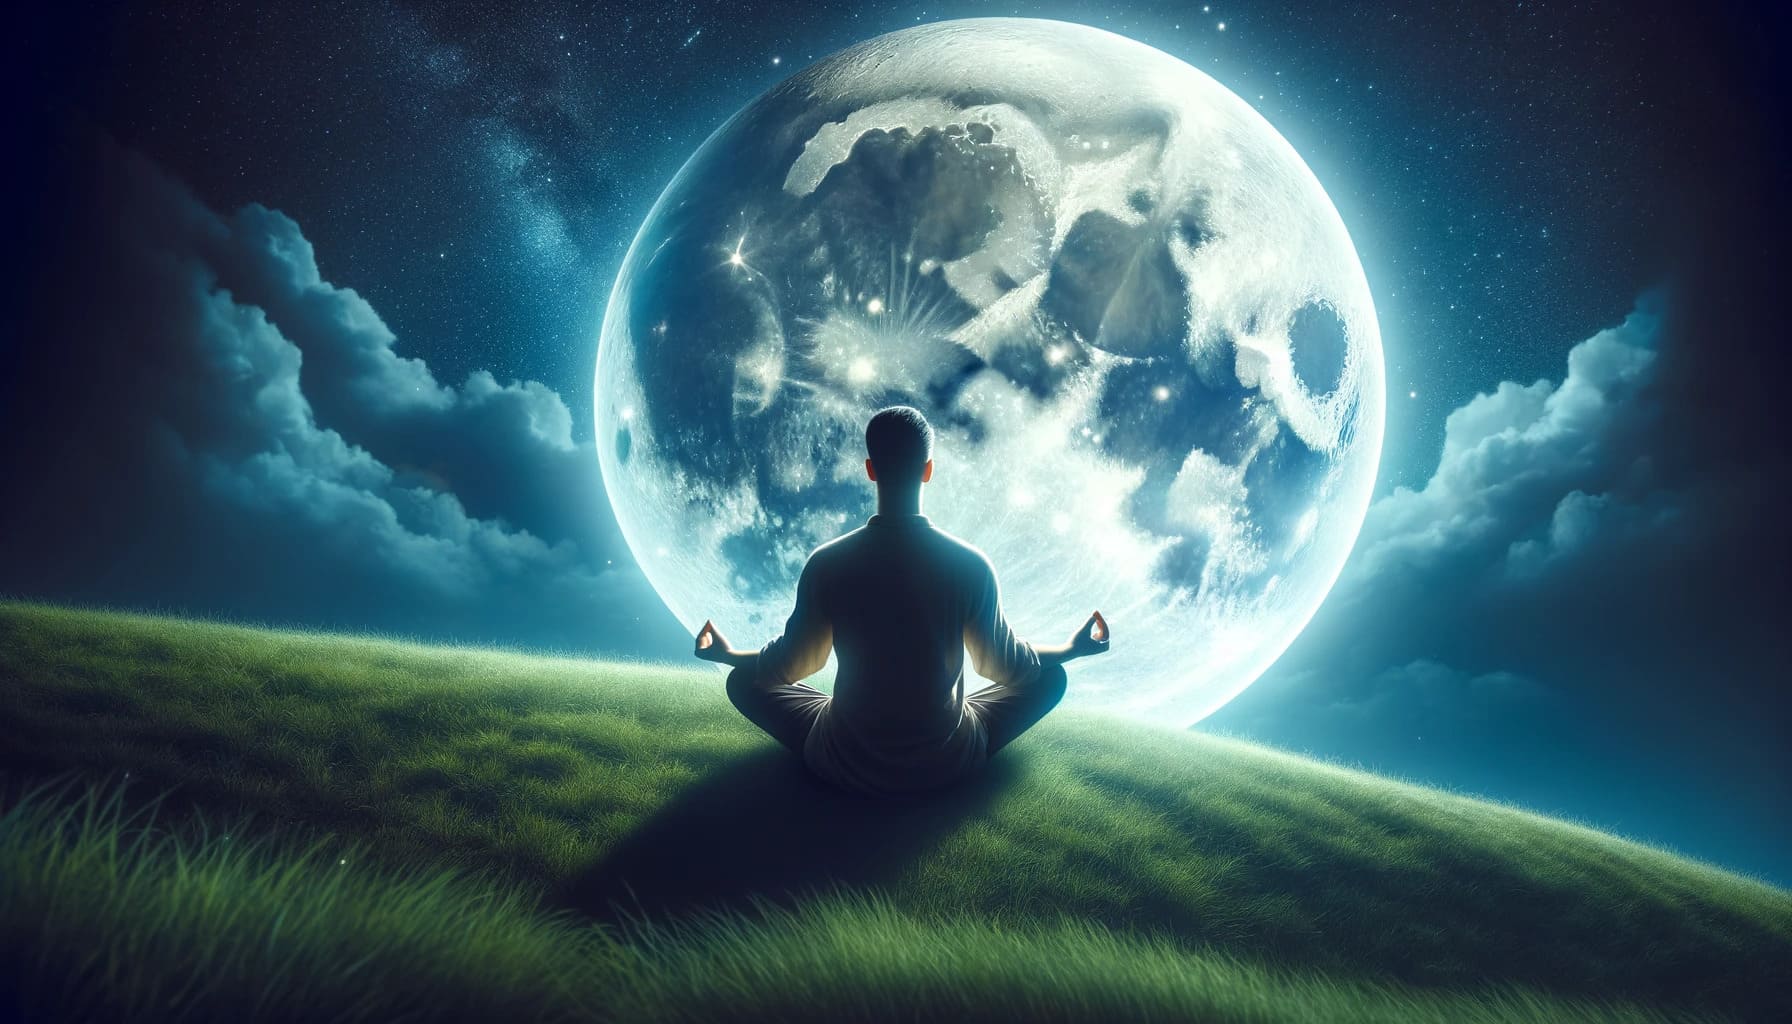 person in a meditative pose under the waxing gibbous moon symbolizing introspection and spiritual growth. The person an Asian m